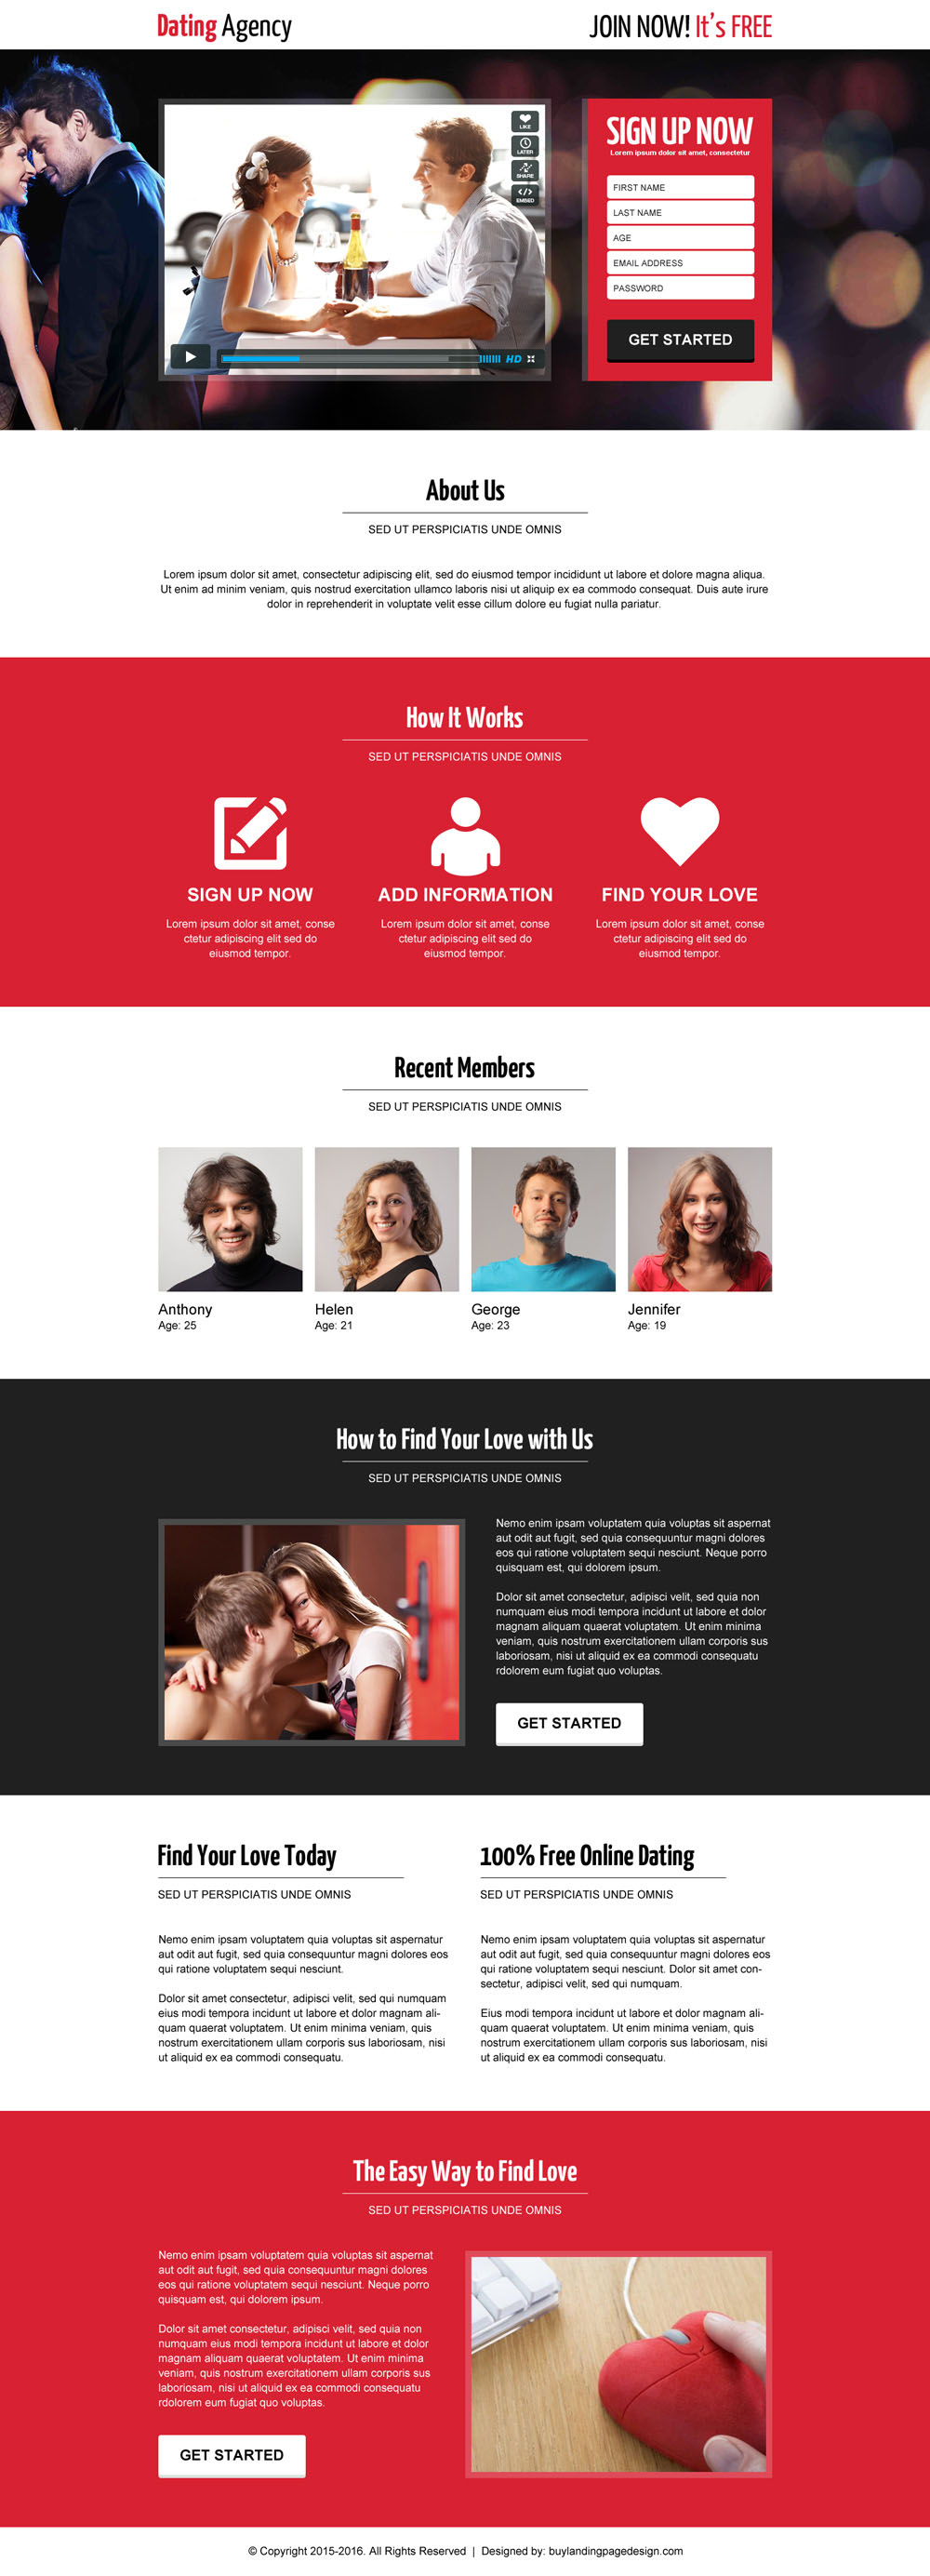 best-dating-agency-sign-up-video-landing-page-design-027